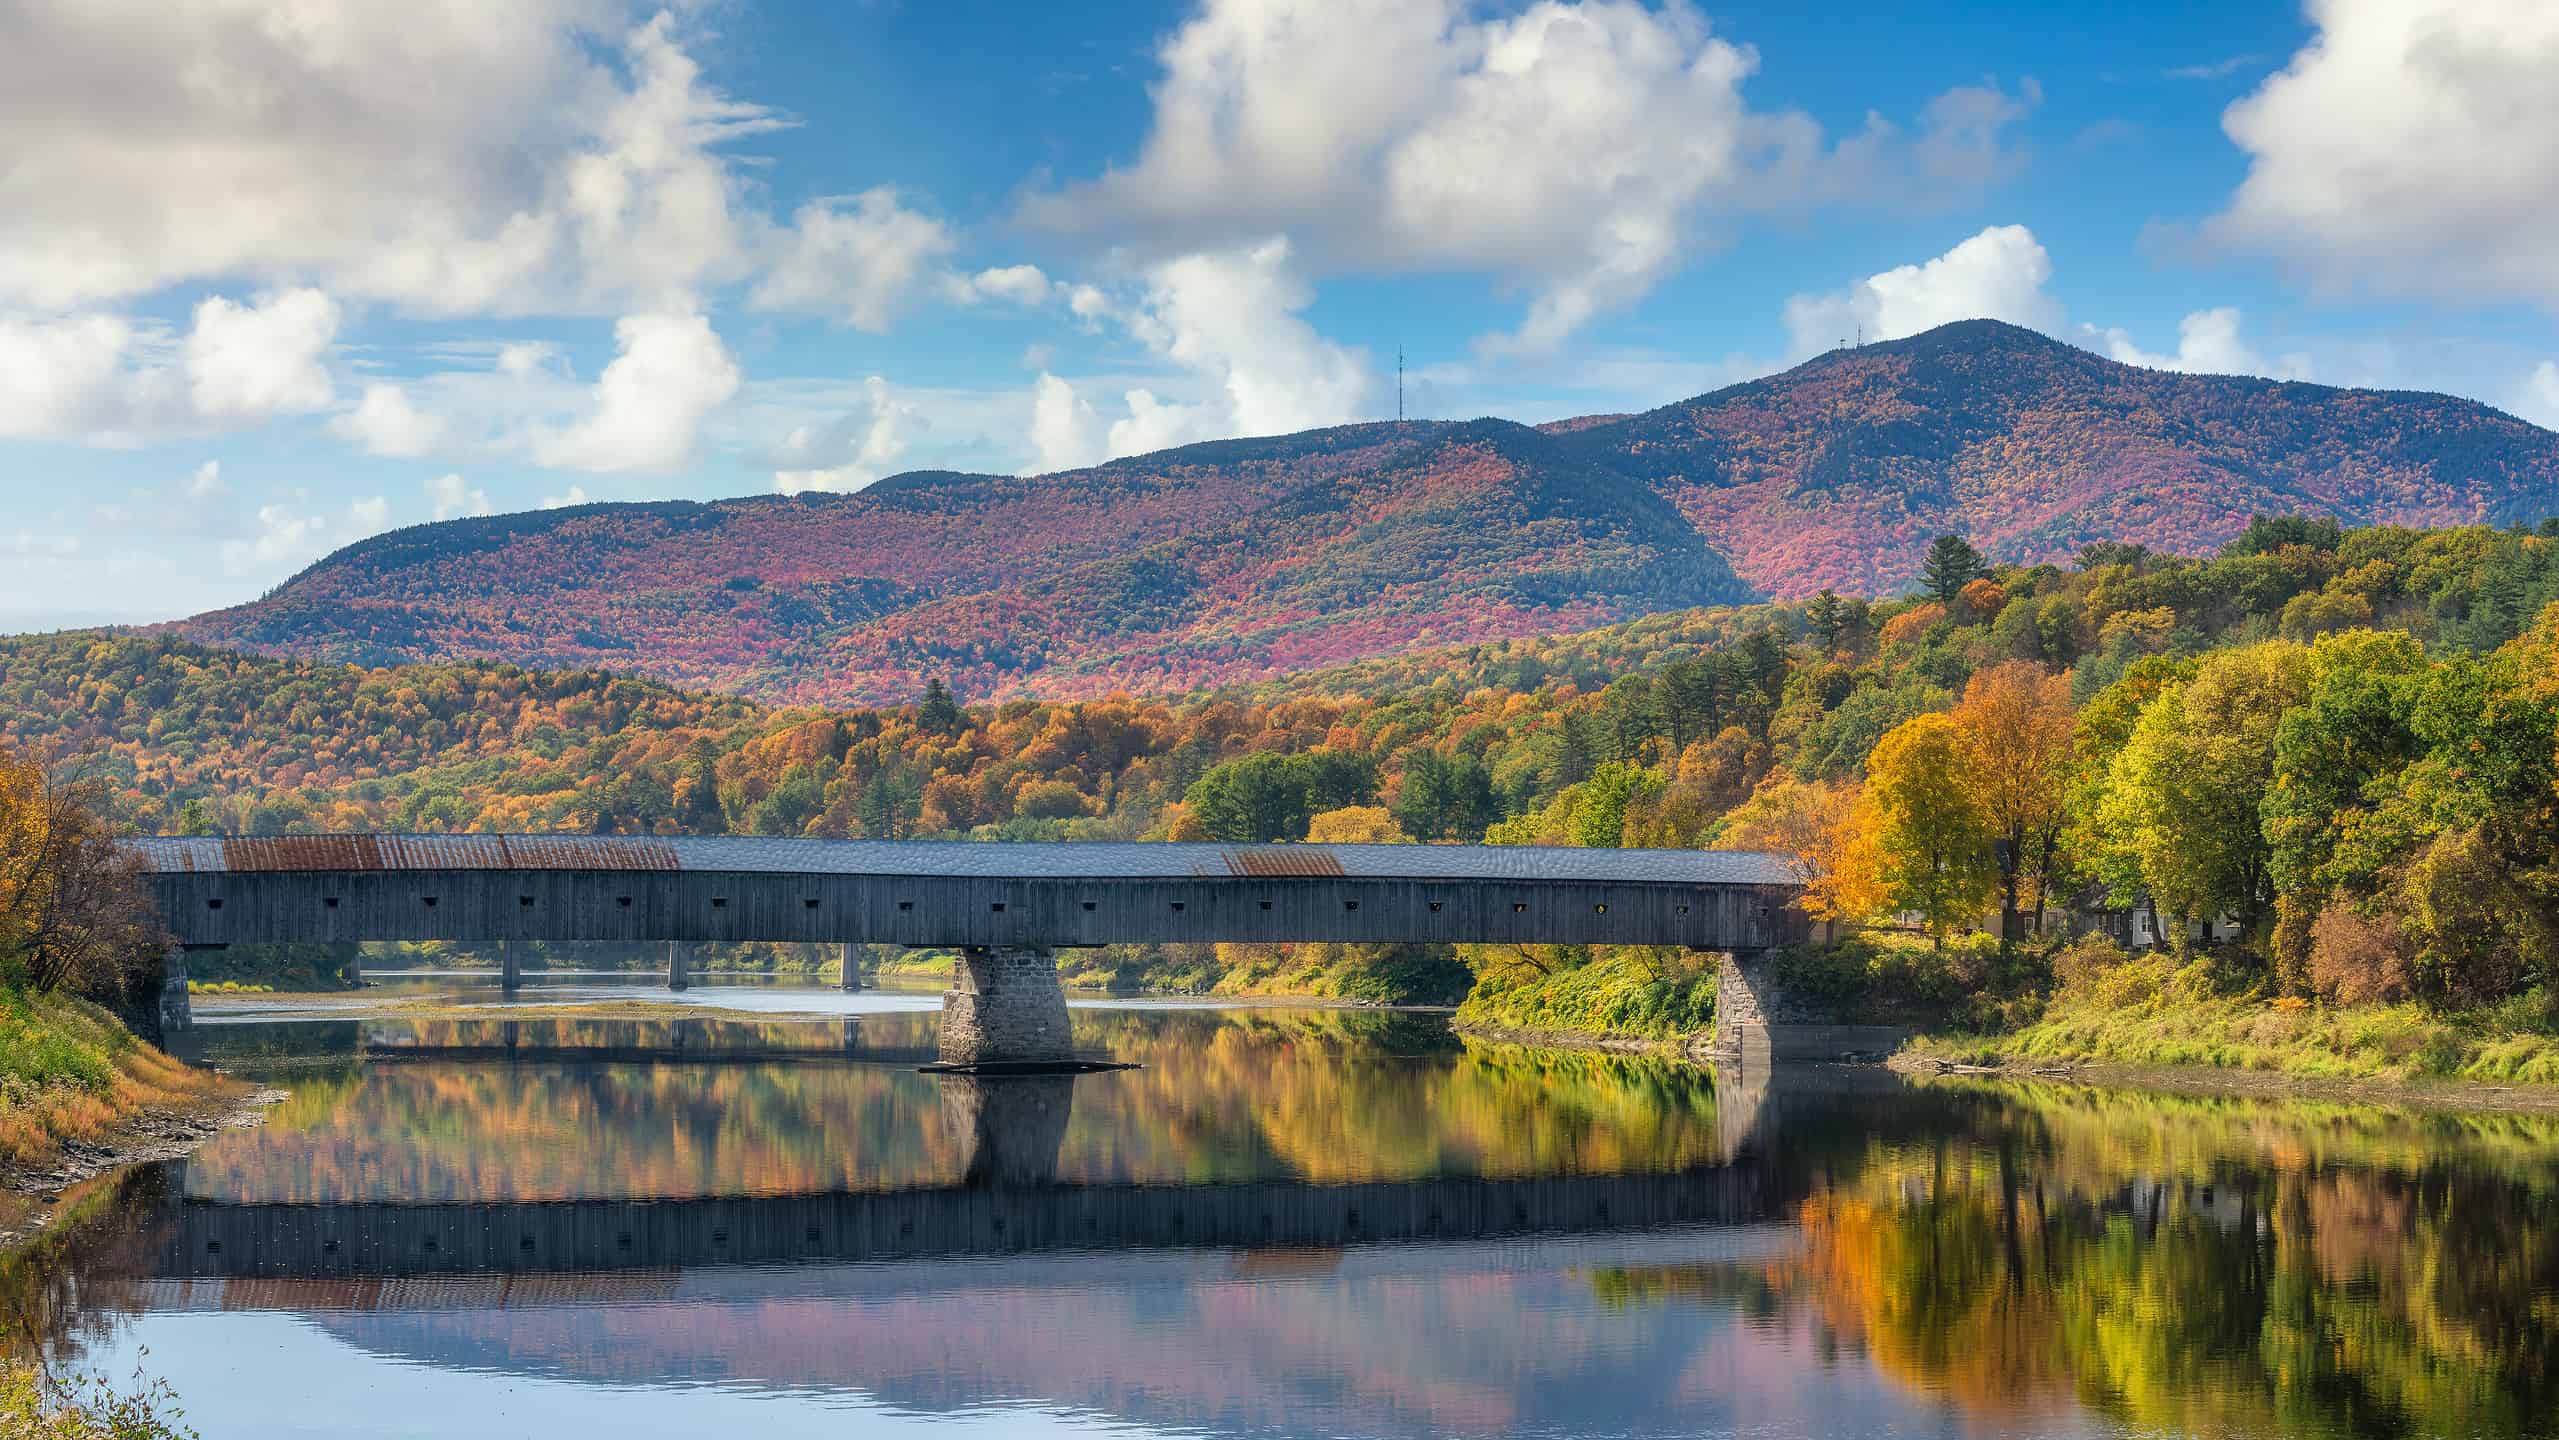 Autumn view of Cornish-Windsor Covered Bridge - longest in New Hampshire and Vermont on the Connecticut River